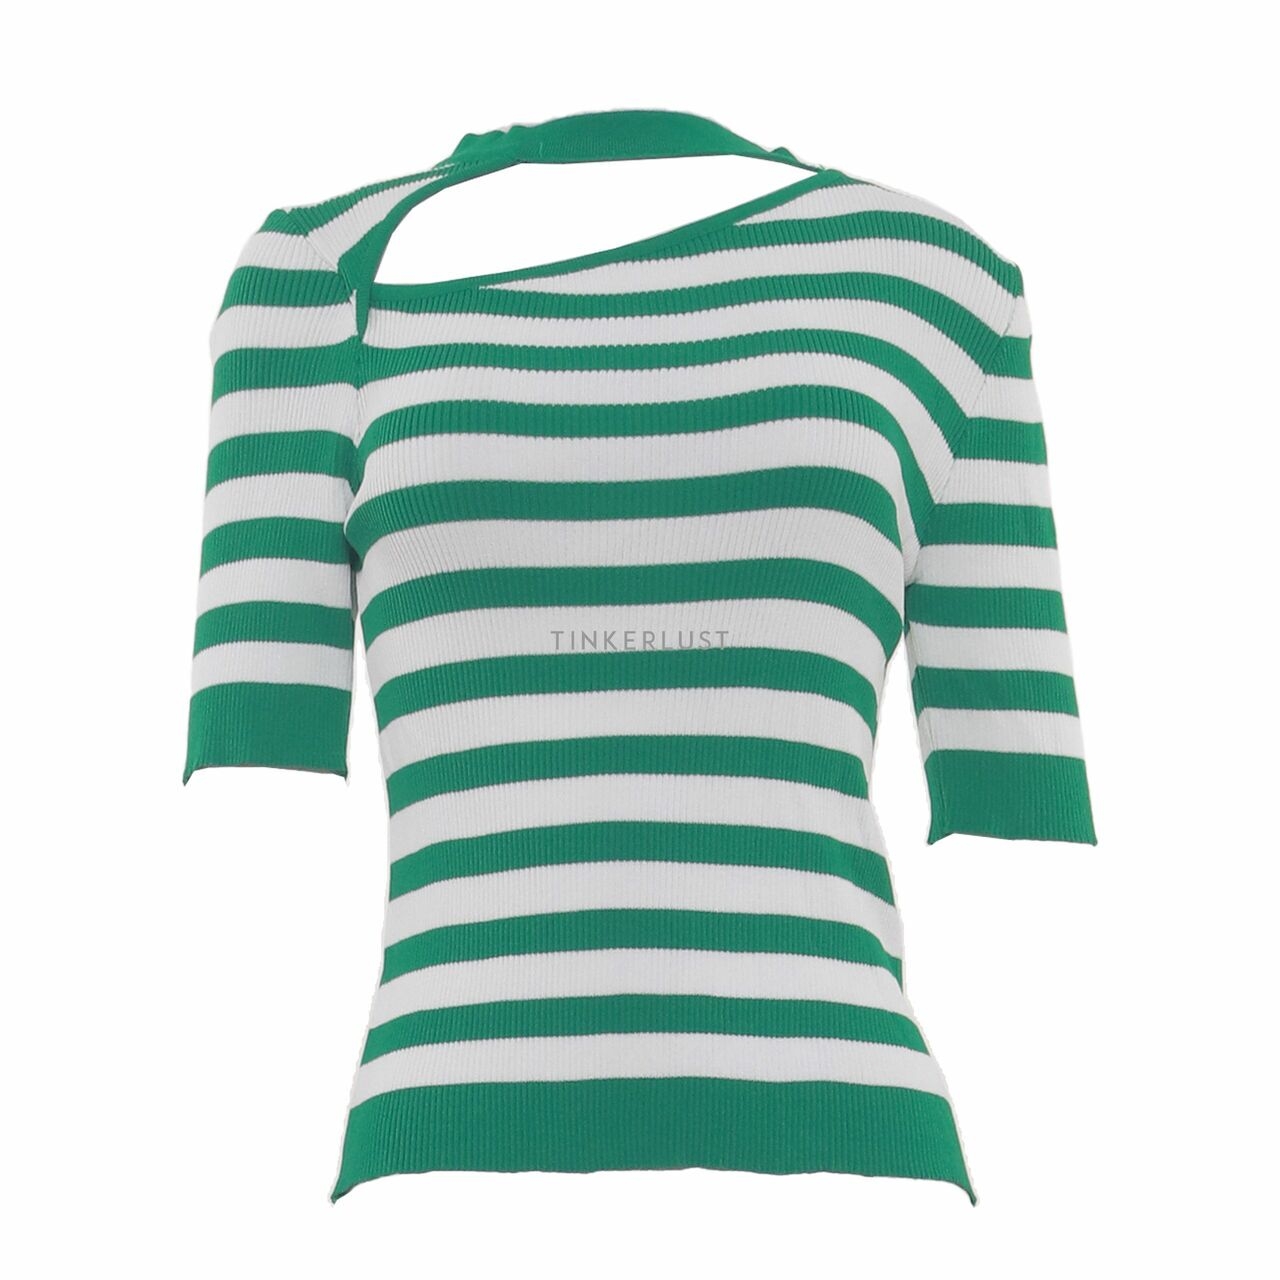 This is April Green & White Stripes Blouse